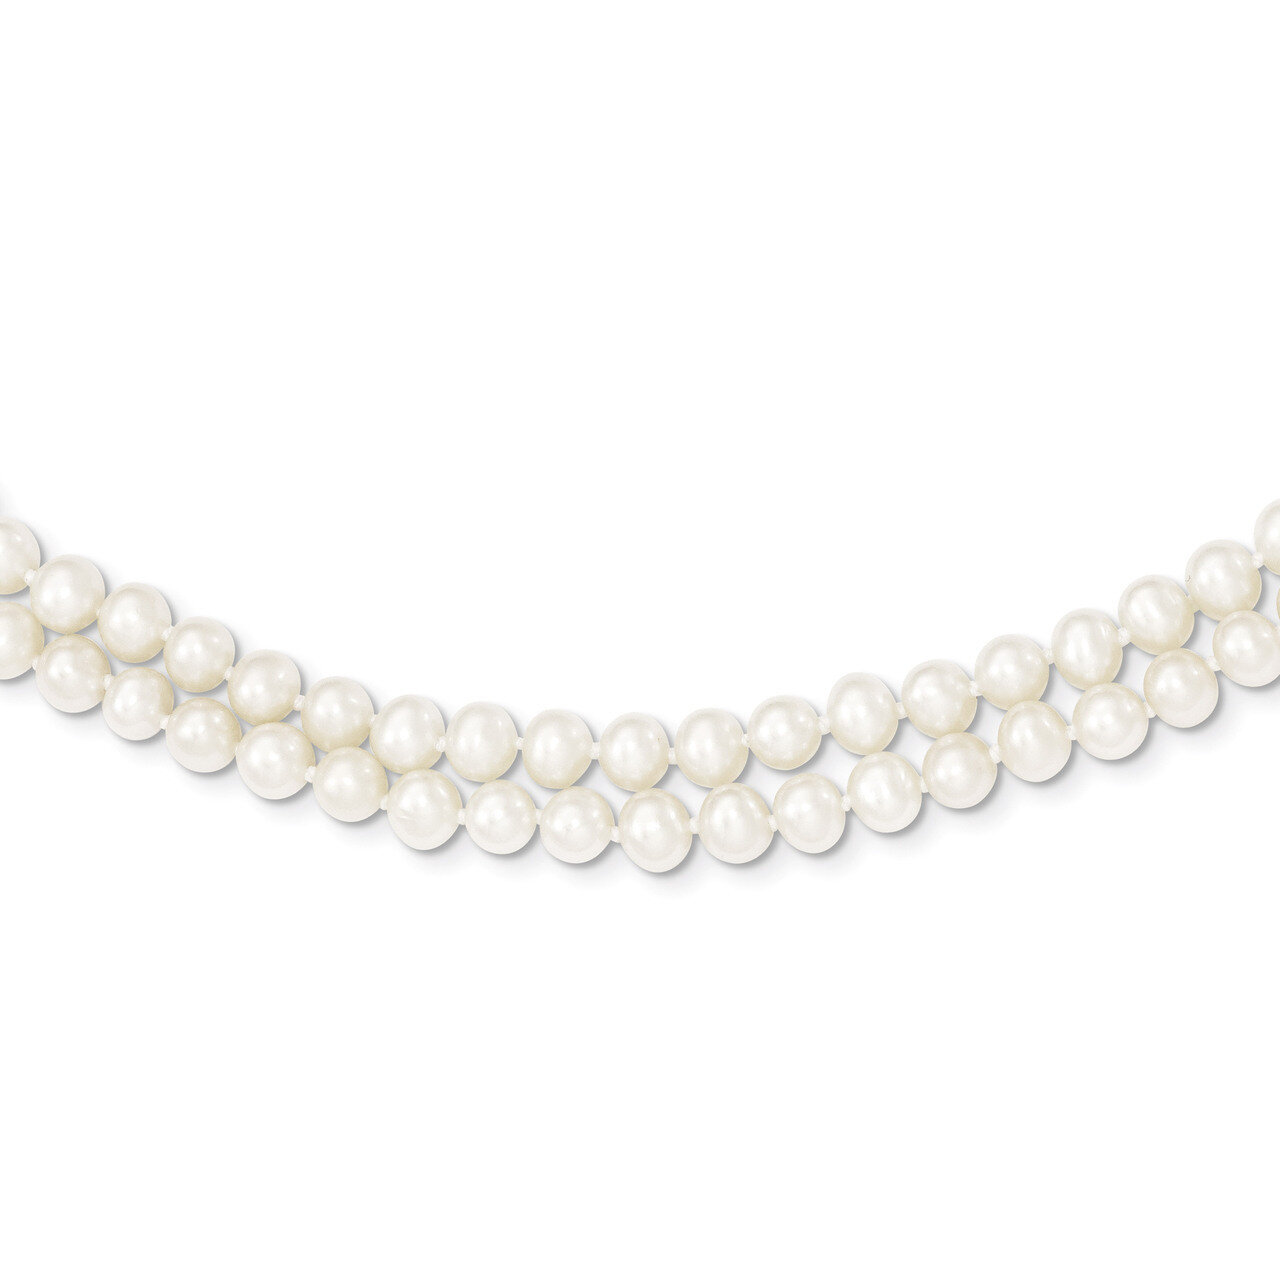 5-5.5mm 2 Strand Cultured Pearl Necklace 18 Inch 14k Gold PR17-18